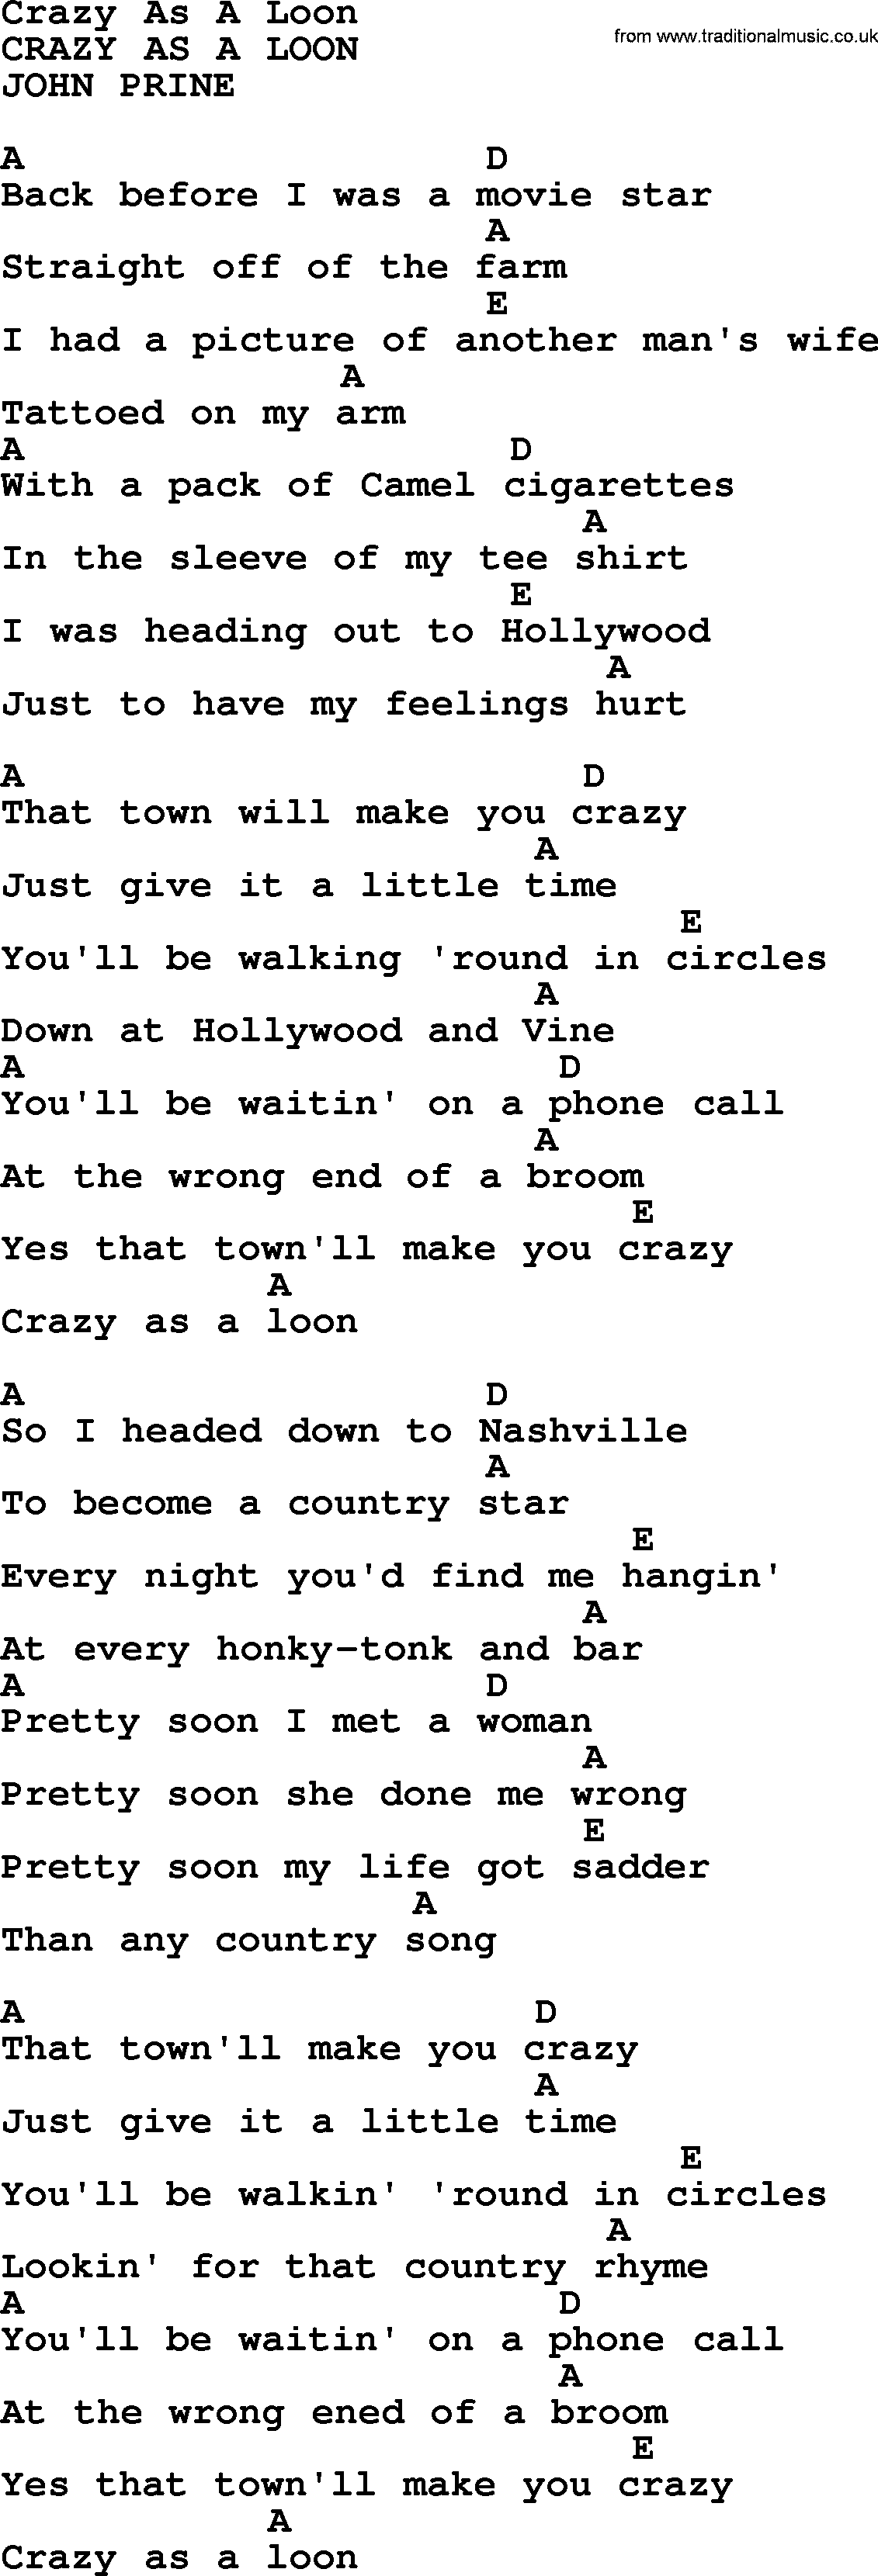 Bluegrass song: Crazy As A Loon, lyrics and chords